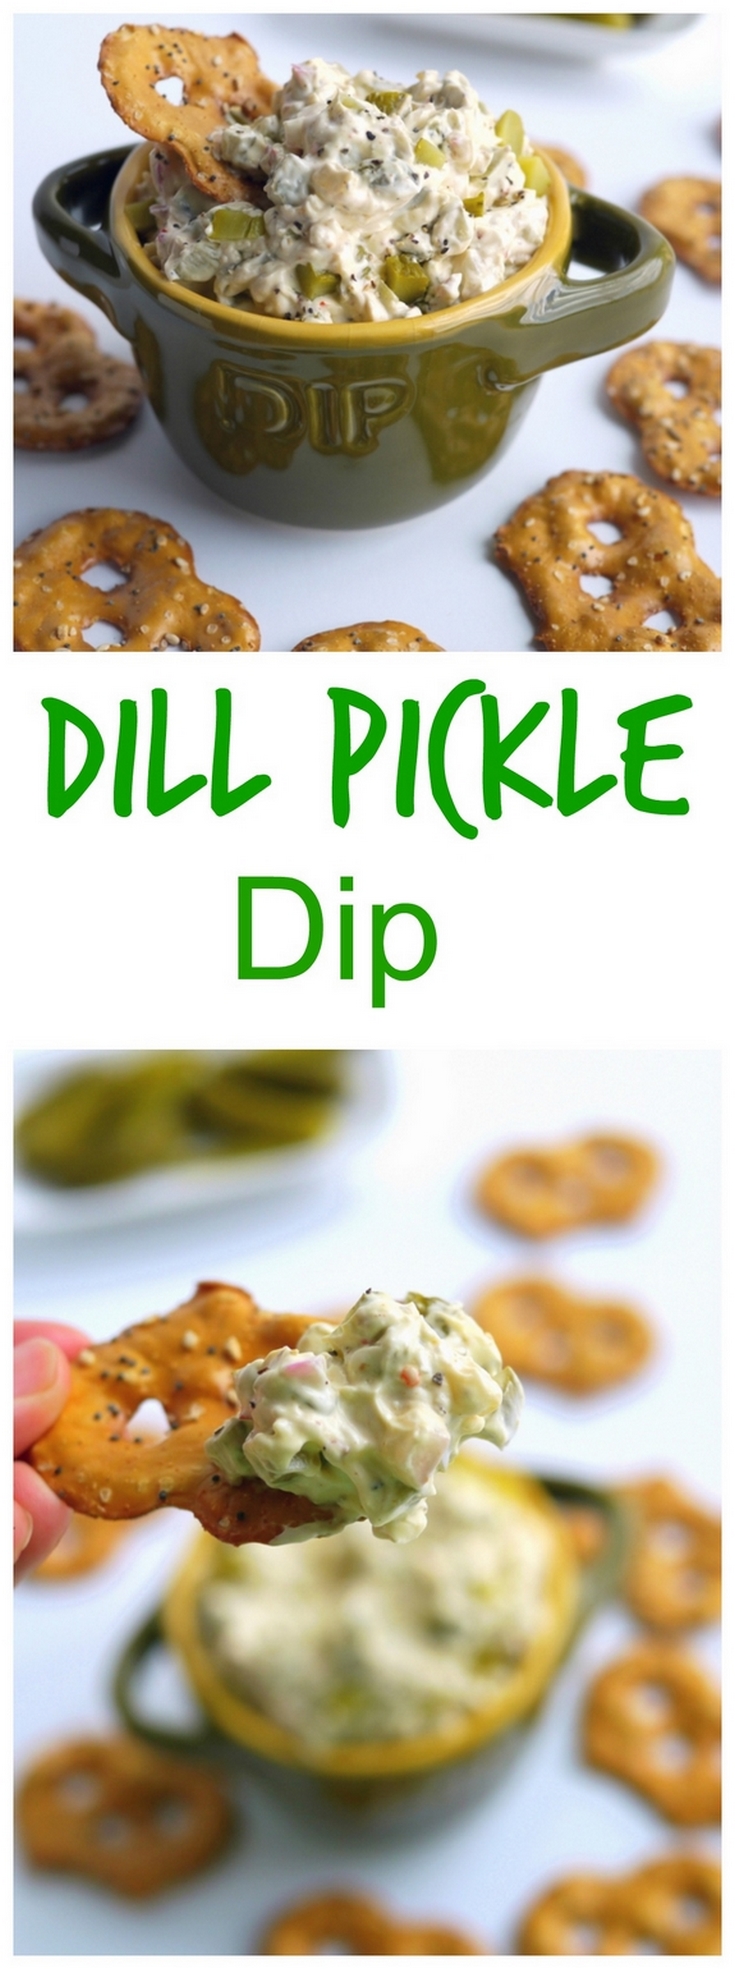 VIDEO + Recipe: Dill Pickle Dip is one mouth-puckering experience you'll want to have from NoblePig.com. via @cmpollak1